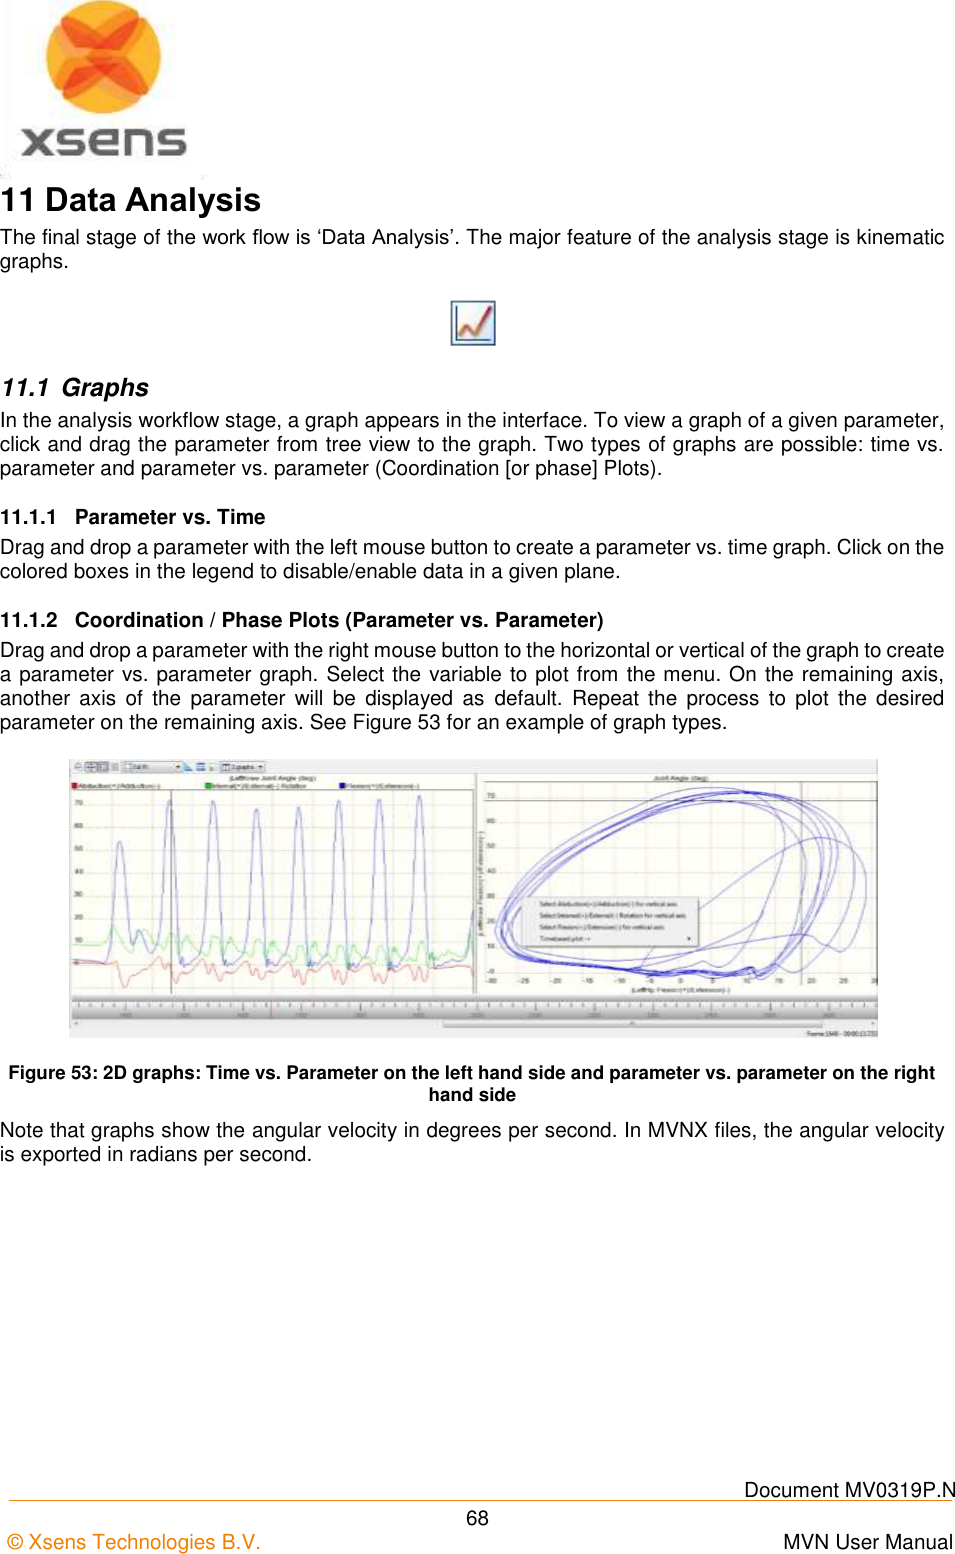    Document MV0319P.N © Xsens Technologies B.V.      MVN User Manual  68 11 Data Analysis The final stage of the work flow is ‘Data Analysis’. The major feature of the analysis stage is kinematic graphs.  11.1  Graphs In the analysis workflow stage, a graph appears in the interface. To view a graph of a given parameter, click and drag the parameter from tree view to the graph. Two types of graphs are possible: time vs. parameter and parameter vs. parameter (Coordination [or phase] Plots). 11.1.1  Parameter vs. Time Drag and drop a parameter with the left mouse button to create a parameter vs. time graph. Click on the colored boxes in the legend to disable/enable data in a given plane. 11.1.2  Coordination / Phase Plots (Parameter vs. Parameter) Drag and drop a parameter with the right mouse button to the horizontal or vertical of the graph to create a parameter vs. parameter graph. Select the variable to plot from the menu. On the remaining axis, another  axis  of  the  parameter  will  be  displayed  as  default.  Repeat  the  process  to  plot  the  desired parameter on the remaining axis. See Figure 53 for an example of graph types.  Figure 53: 2D graphs: Time vs. Parameter on the left hand side and parameter vs. parameter on the right hand side Note that graphs show the angular velocity in degrees per second. In MVNX files, the angular velocity is exported in radians per second. 